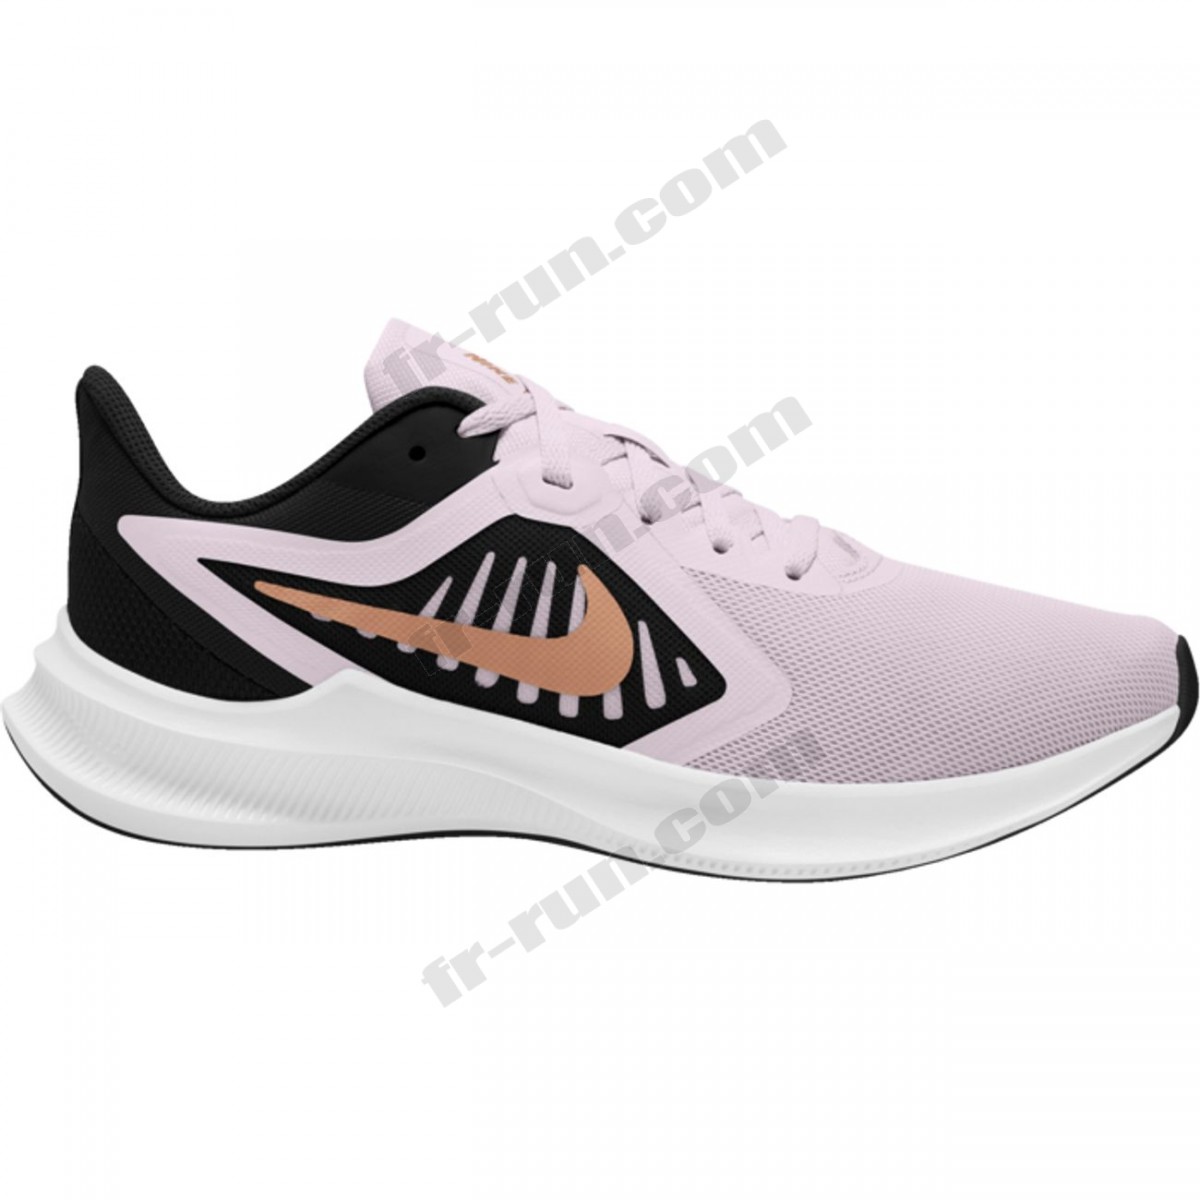 Nike/CHAUSSURES BASSES running femme NIKE NIKE DOWNSHIFTER 10 W √ Nouveau style √ Soldes - -0